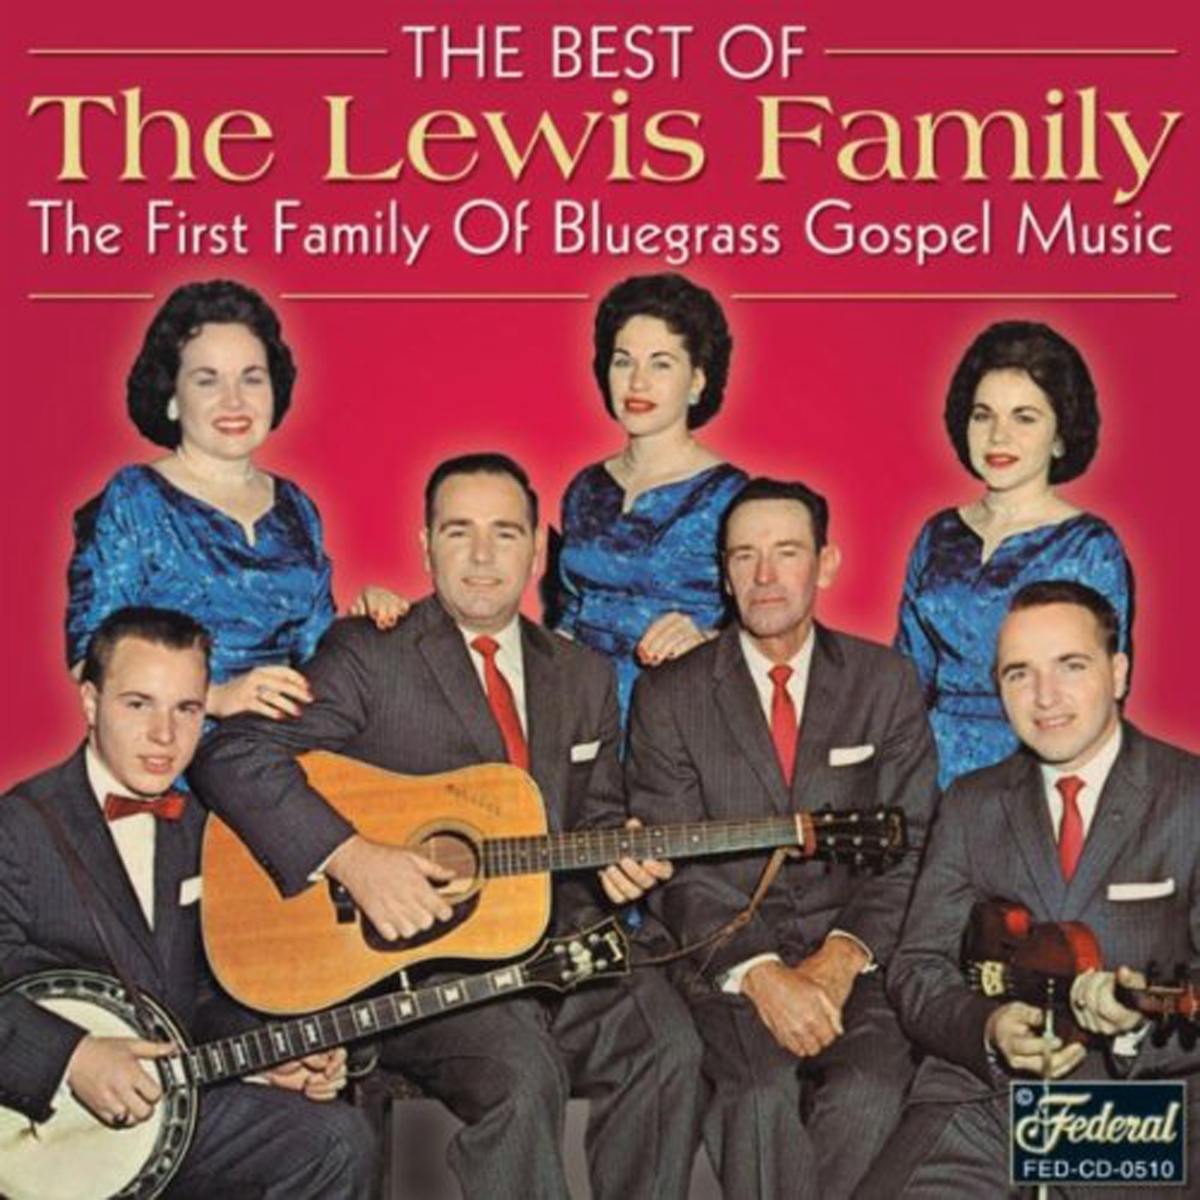 The Lewis Family, “America’s First Family of Bluegrass Gospel Music”, musical story began with the Lewis Brothers who played string band music for local shows and square dances from 1947 to 1951.  In 1951 the name was changed to The Lewis Family and the all-gospel format was adopted.  Encompassing three generations, the show offered a broad appeal to all ages.  Working more than 200 dates each year, the enormous popularity of the group was evidenced by the fact that it received more repeat bookings than any other band on the bluegrass festival circuit. Induction of The Lewis Family into the prestigious Georgia Music Hall of Fame in 1992 was a special highlight for the family members.  The Lewis Family received its first of several coveted Dove Awards in 1999.  In 2000, Pop Lewis was inducted into the Southern Gospel Music Hall of Fame.  Also, in 2000, each group member received the Grand Ole Gospel Reunion’s “Living Legend Award”.  The Lewis Family received the highest honor given in gospel music by begin inducted into GMA’s Gospel Music Hall of Fame in 2005 and in 2006 received bluegrass music’s highest honor by being inducted into the International Bluegrass Music Hall of Fame.  In 2007, The Lewis Family members were recognized as lifetime members of the International Bluegrass Music Association (IBMA). 